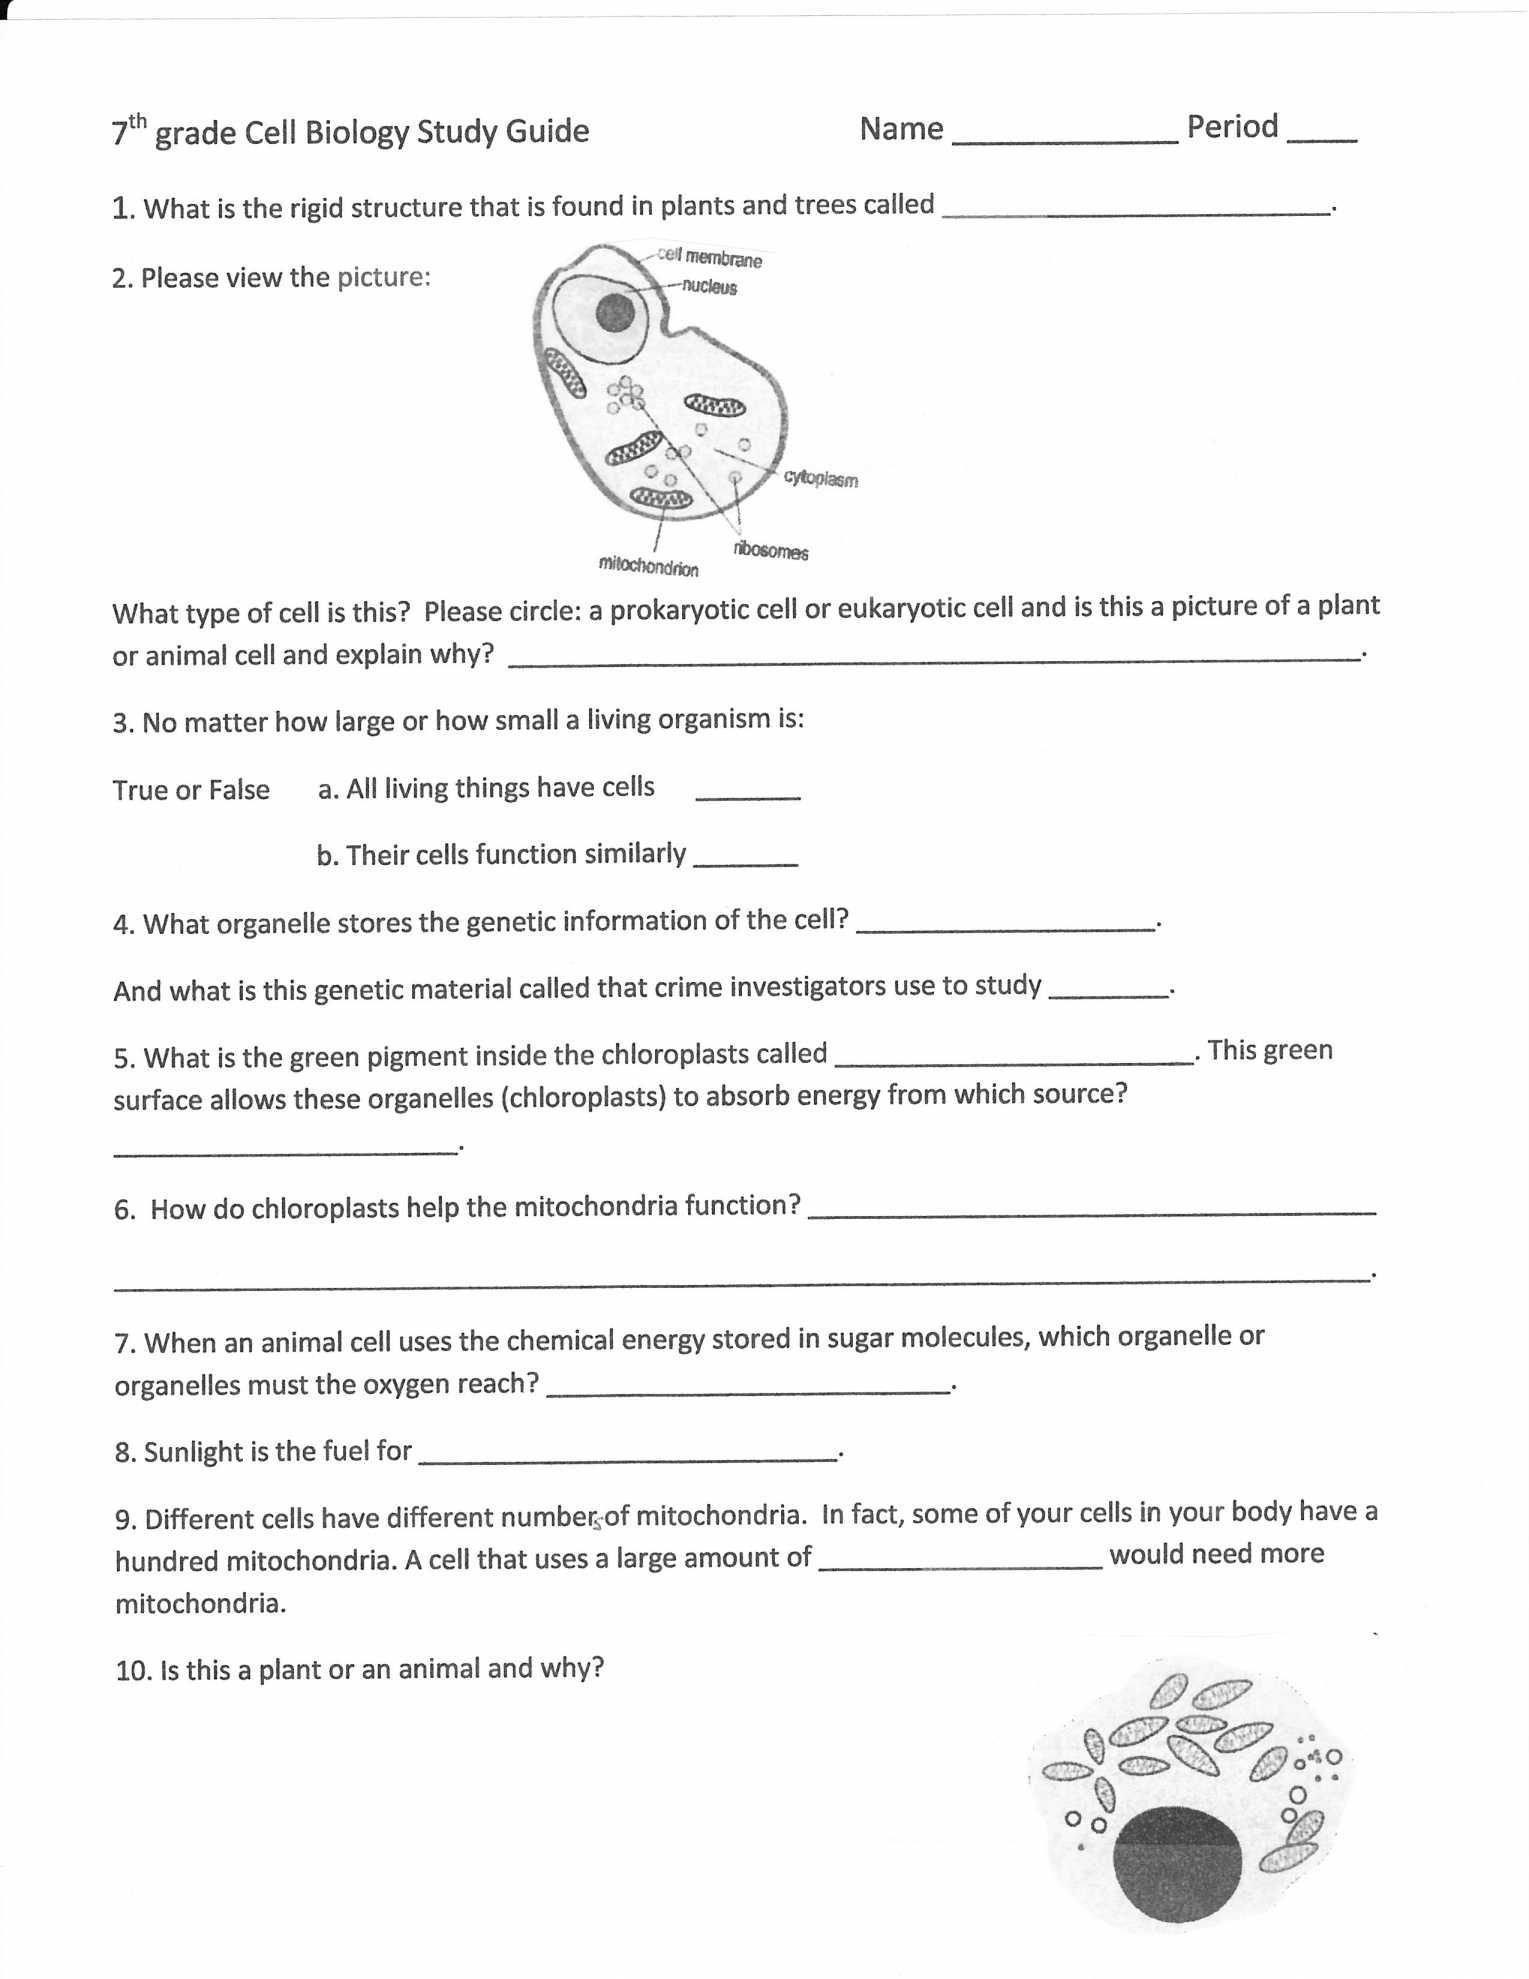 Physical Science Worksheet Conservation Of Energy 2 Answer Key Intended For Physical Science Worksheet Conservation Of Energy 2